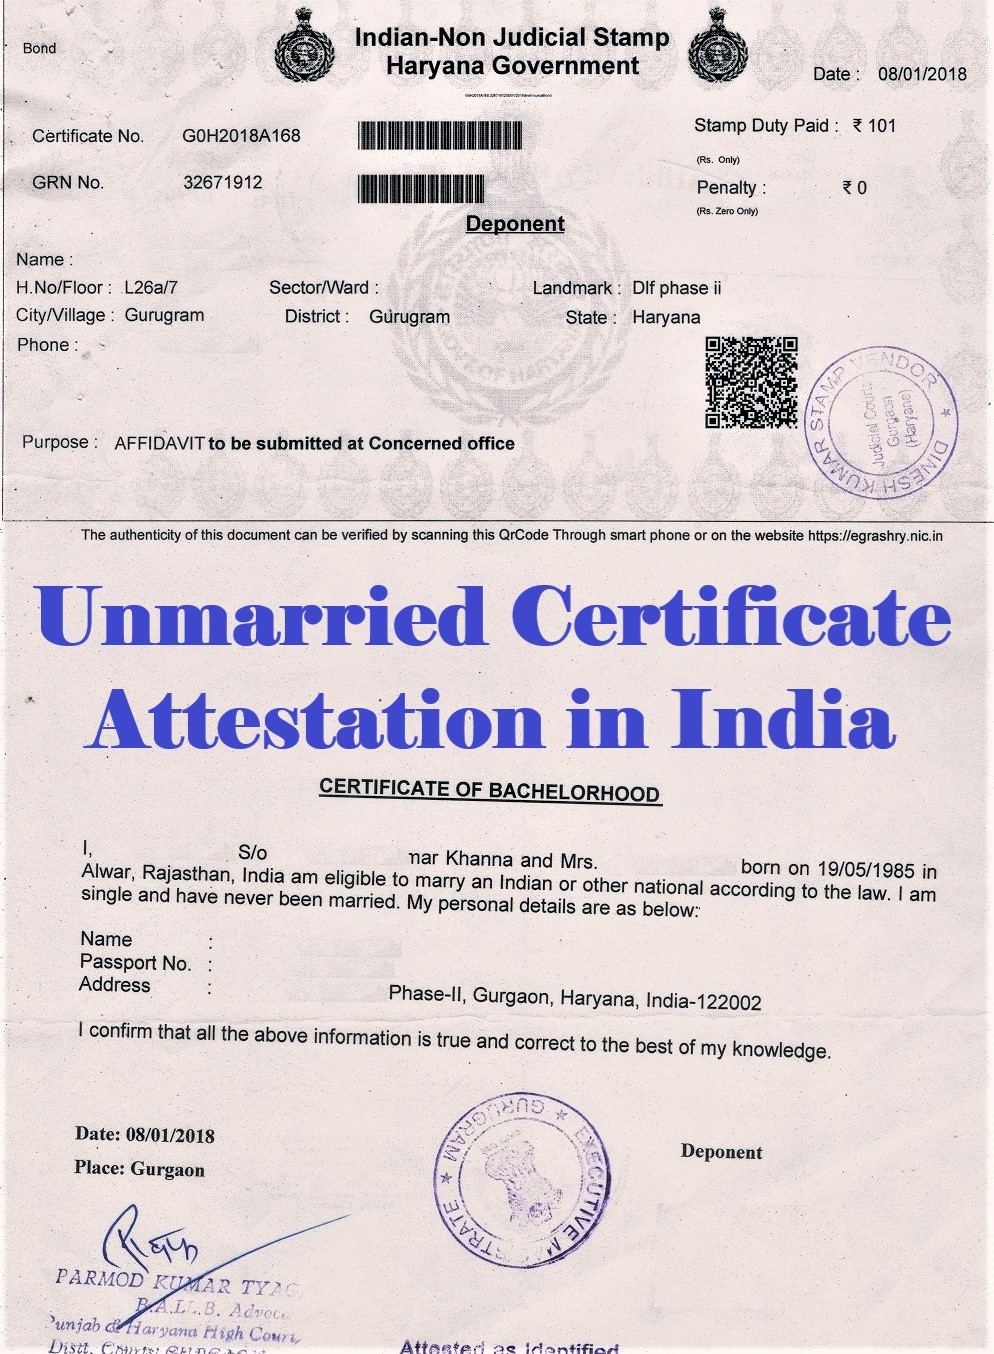 Unmarried Certificate Attestation from Czechia Embassy